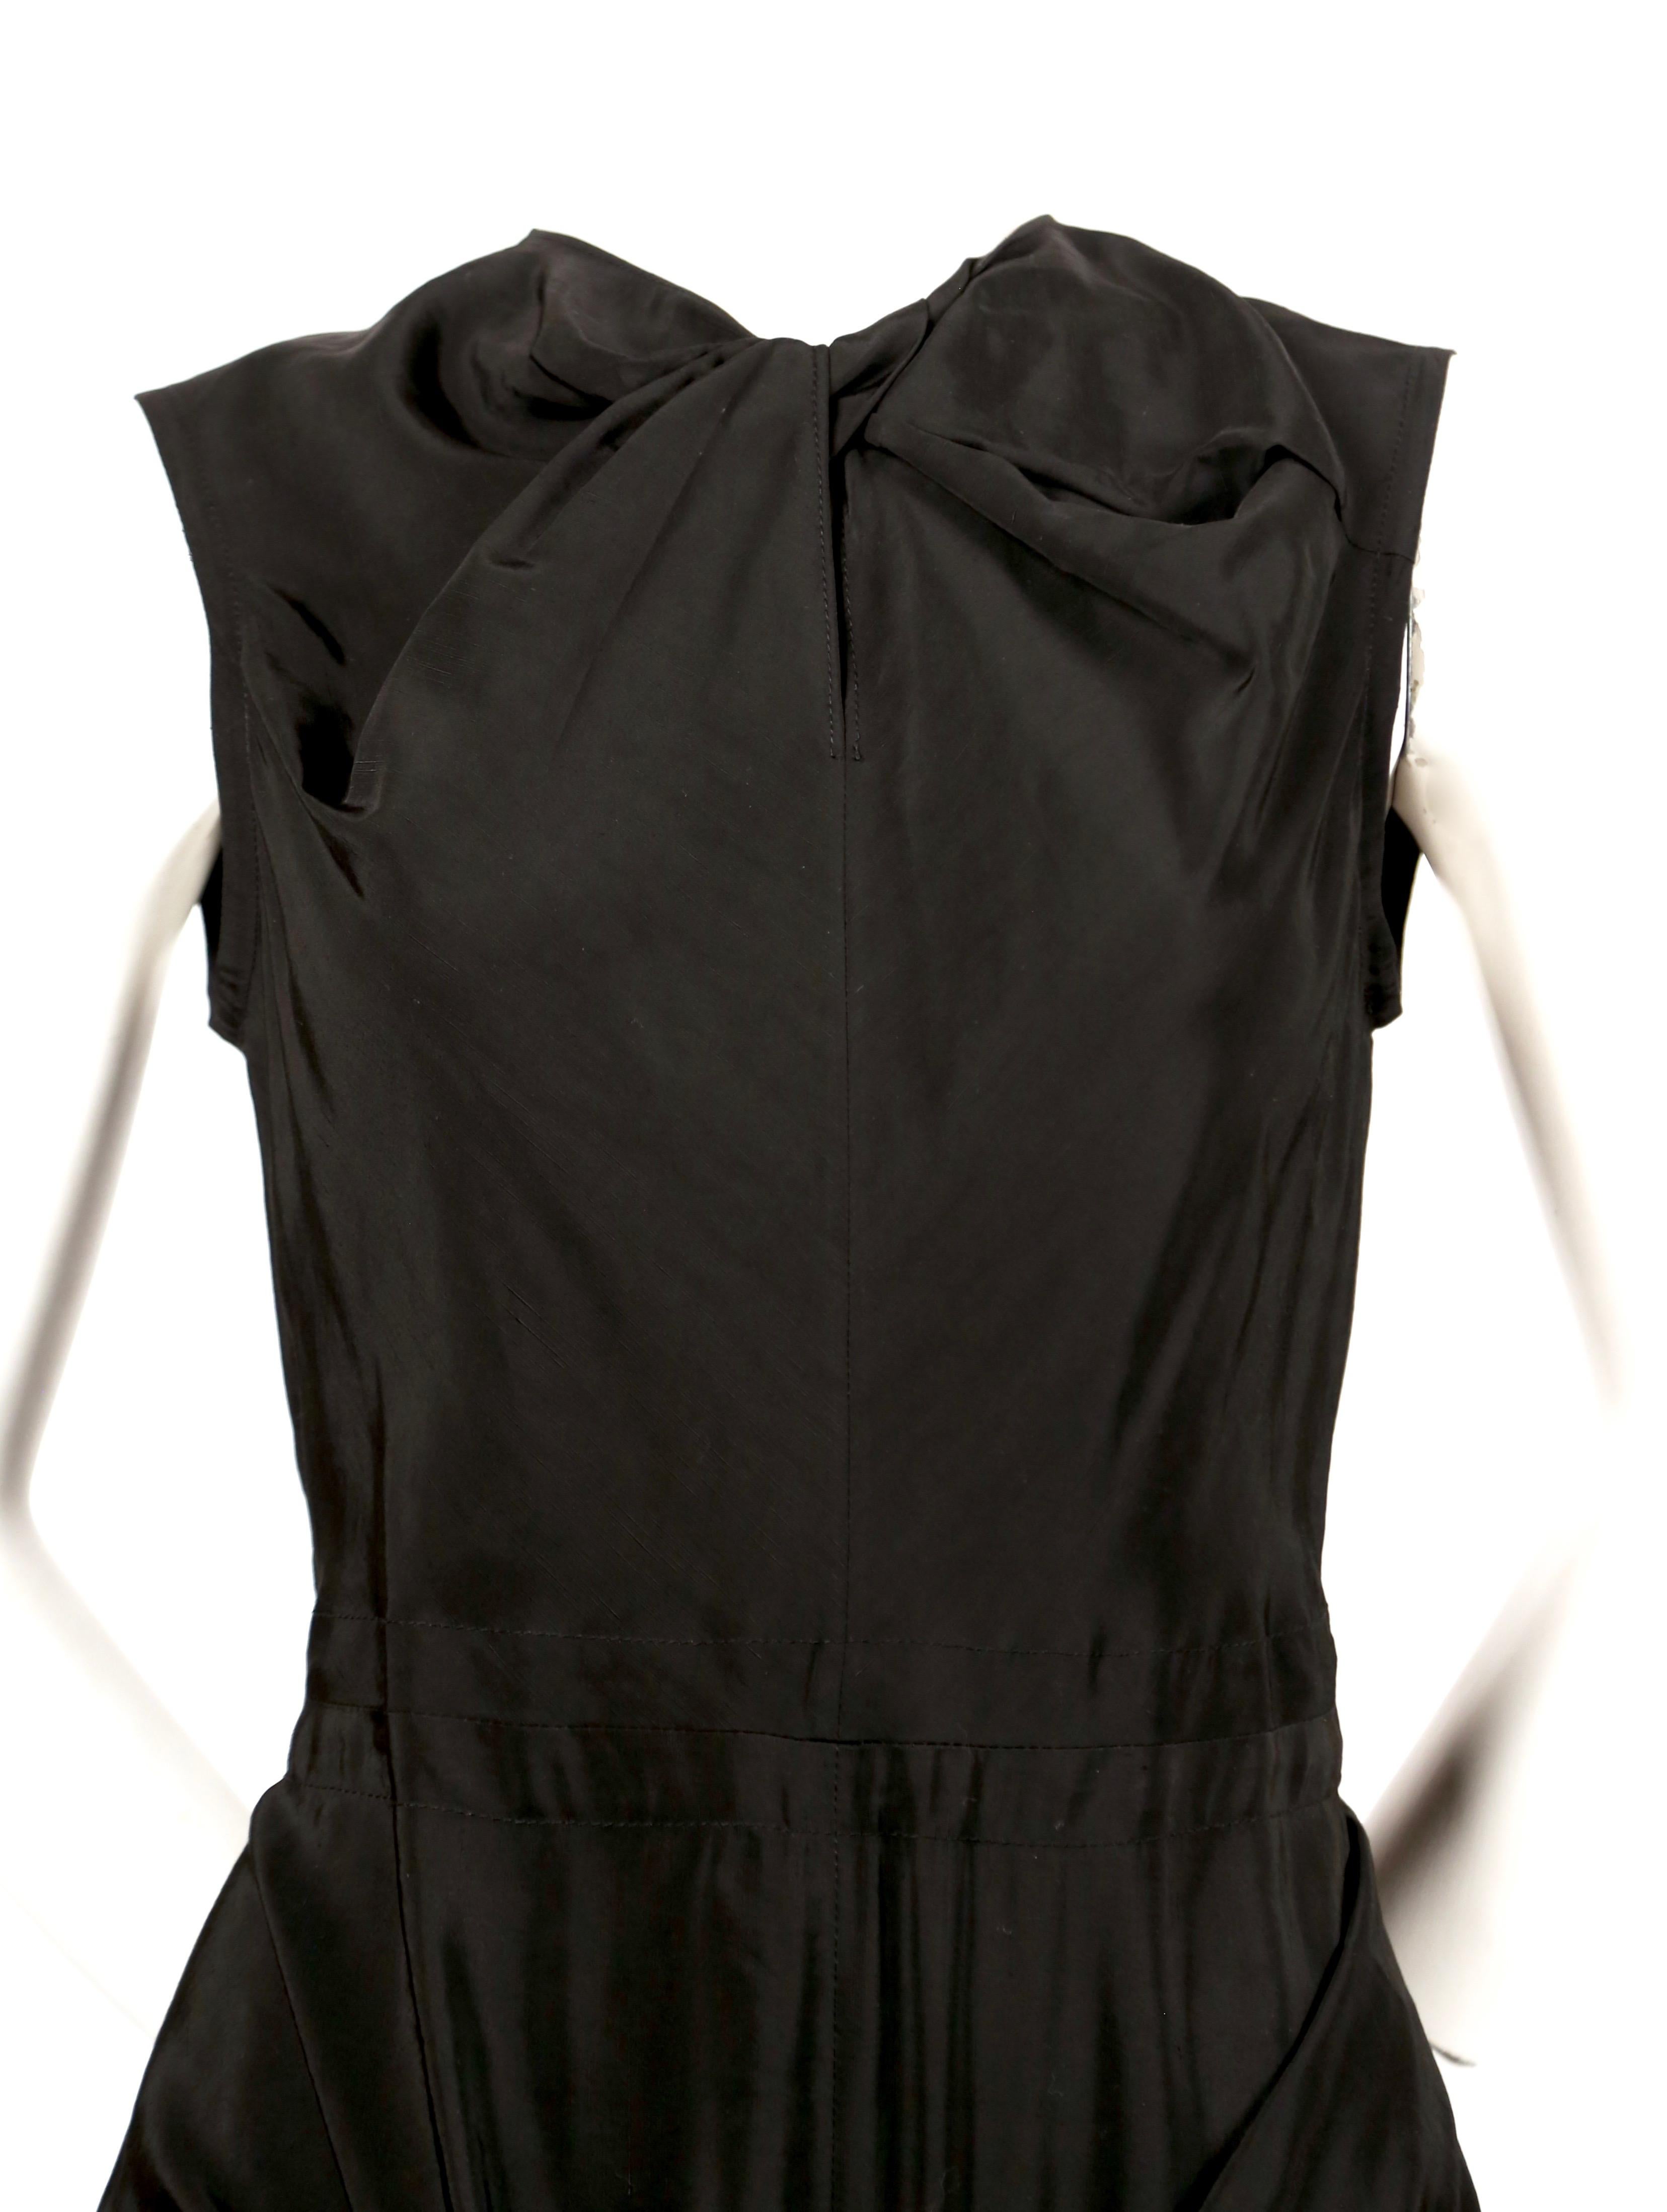 new CELINE By PHOEBE PHILO black dress with ties and cut out back For Sale 4